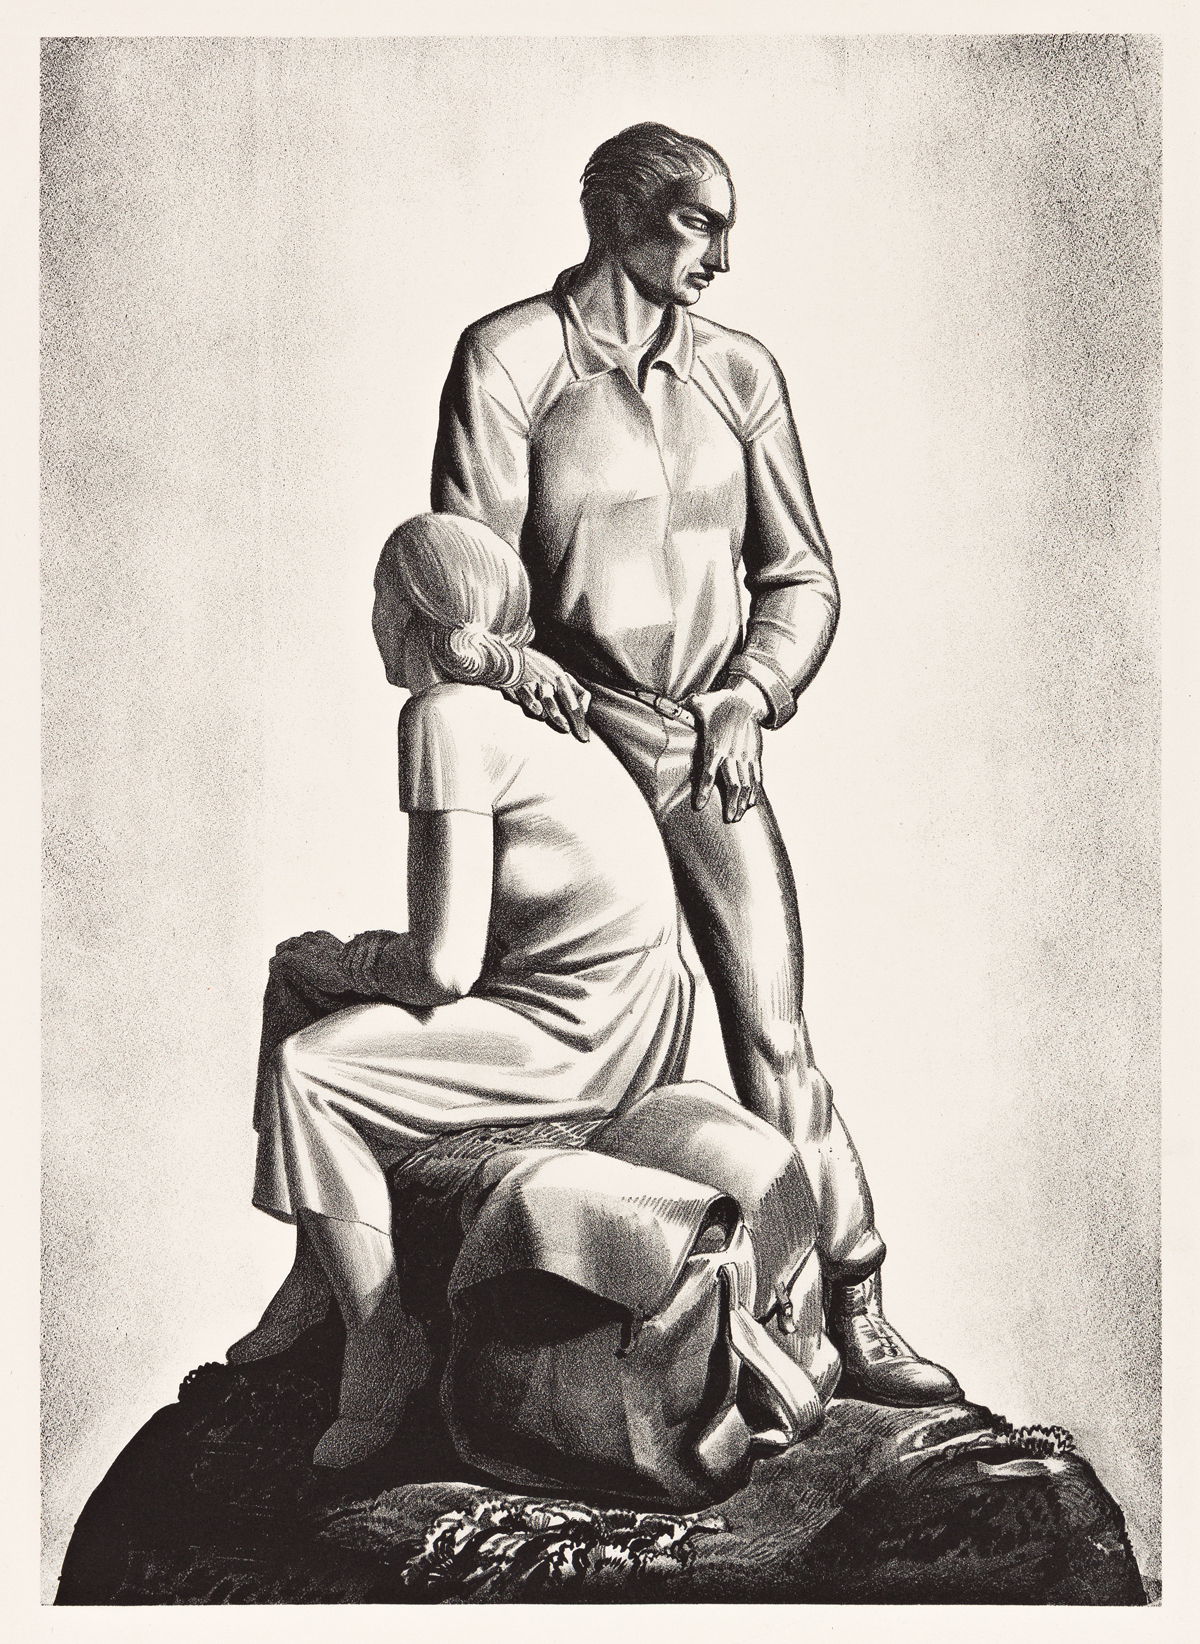 ROCKWELL KENT (1882-1971) And Now Where?